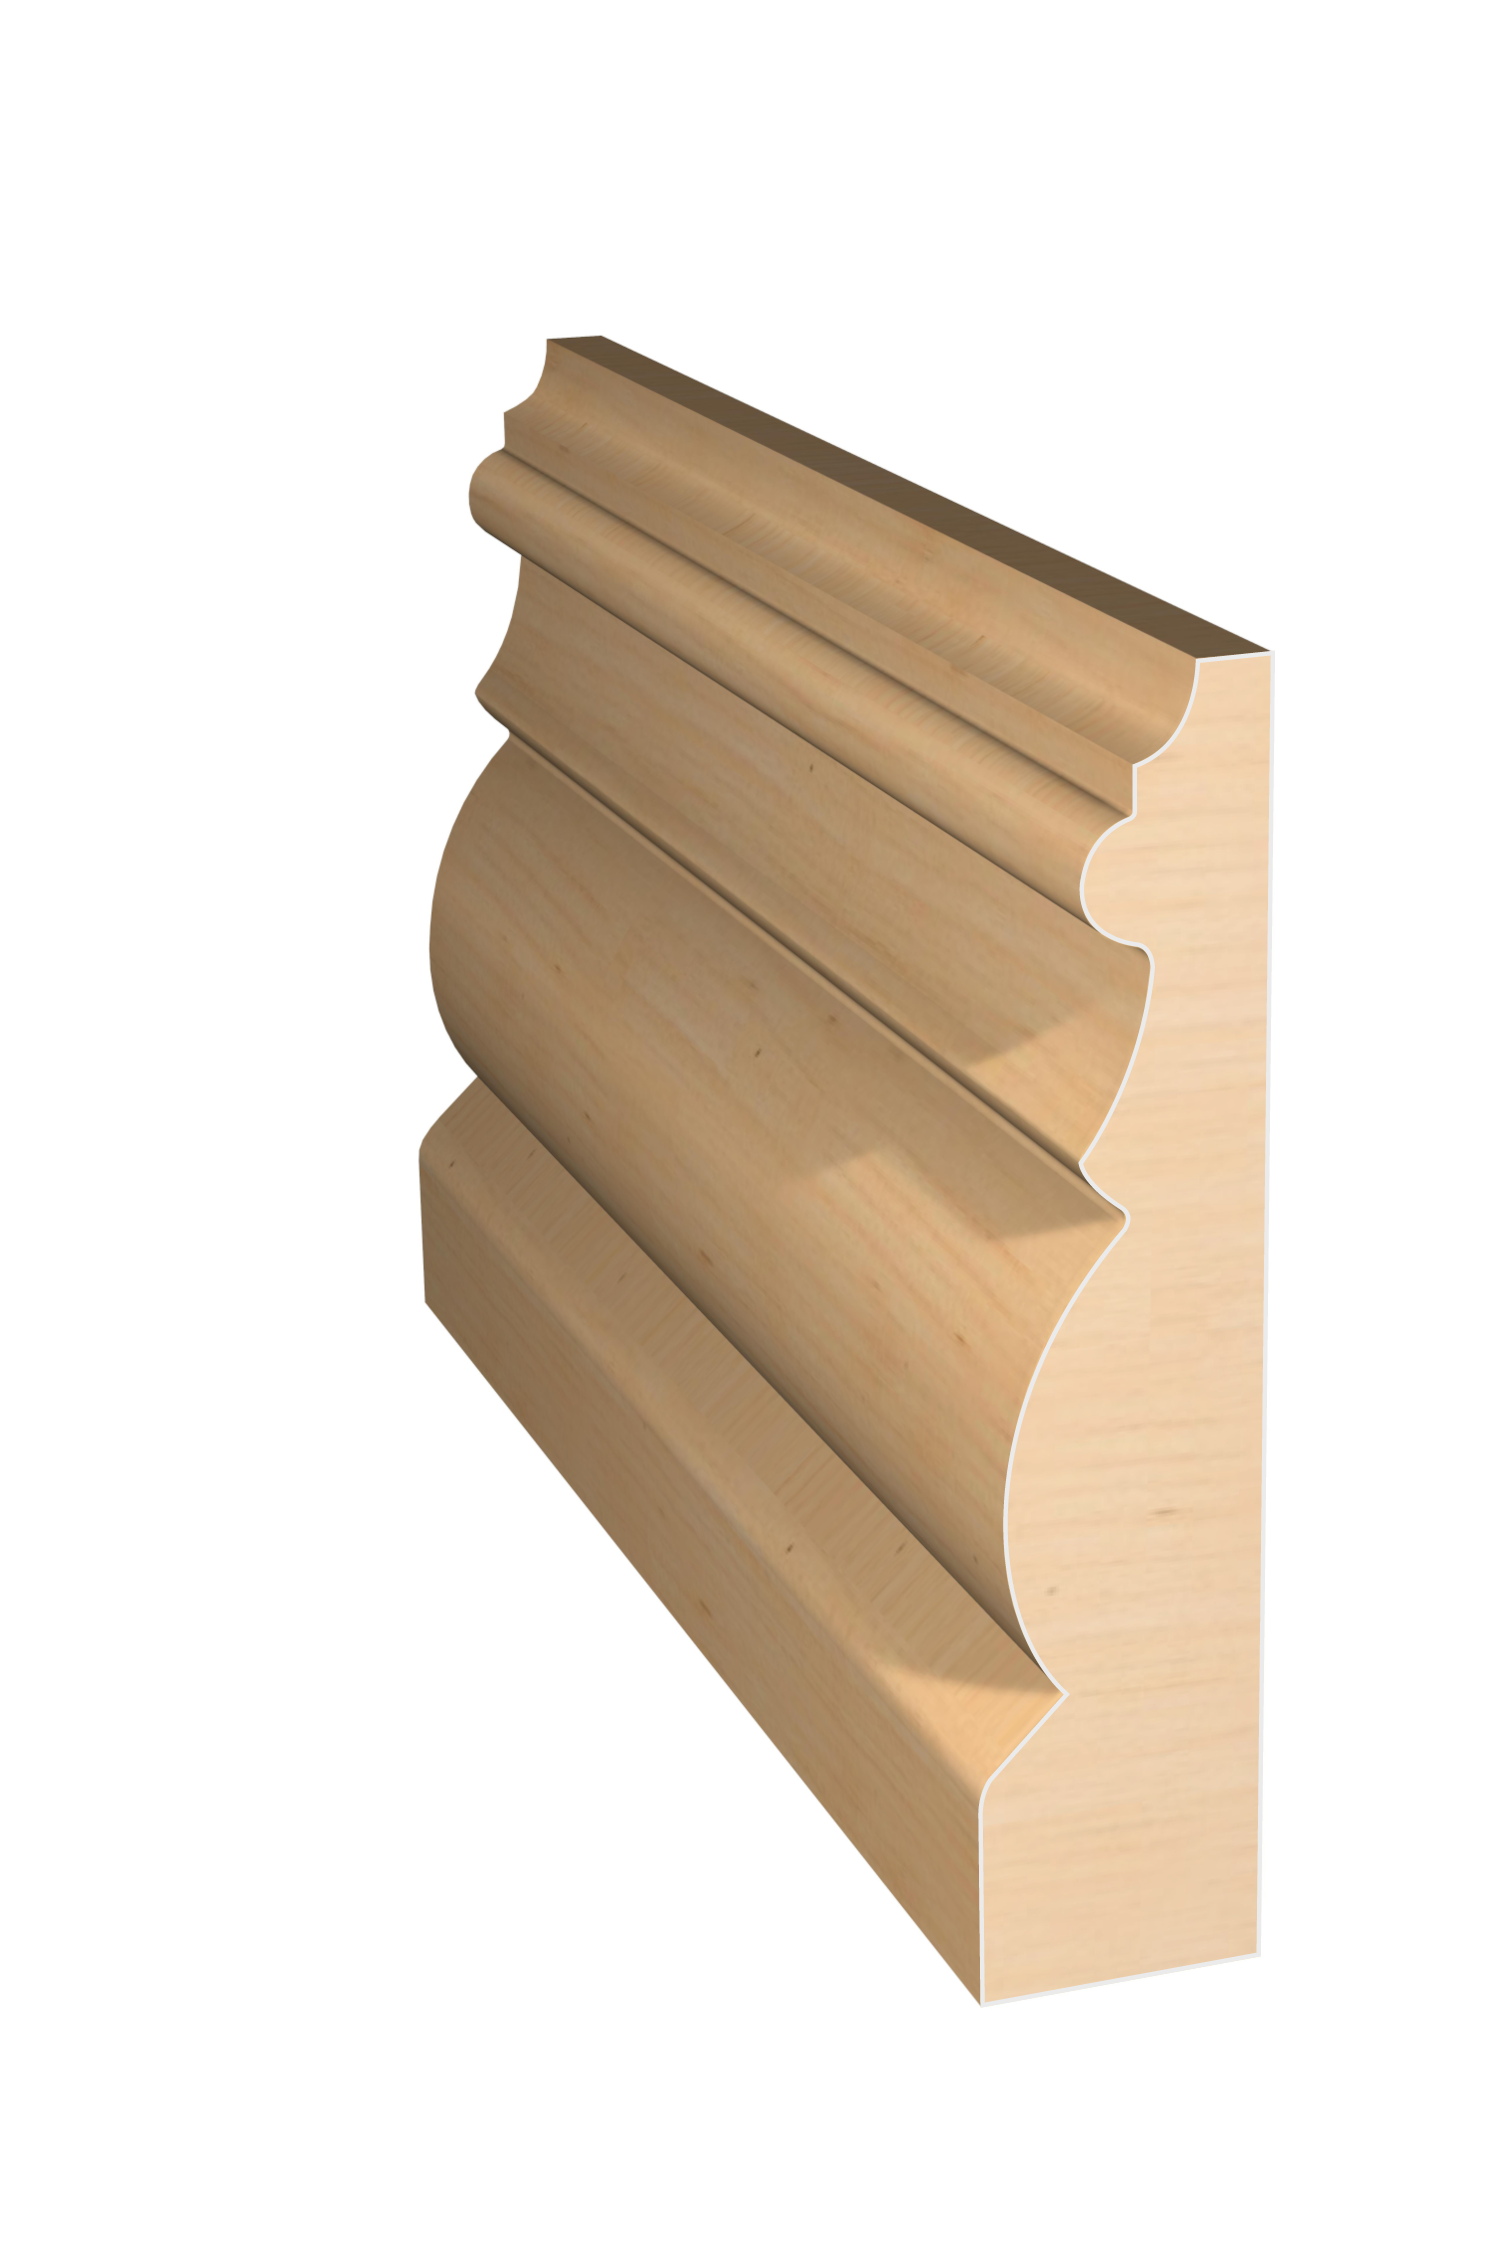 Three dimensional rendering of custom casing wood molding CAPL3583 made by Public Lumber Company in Detroit.